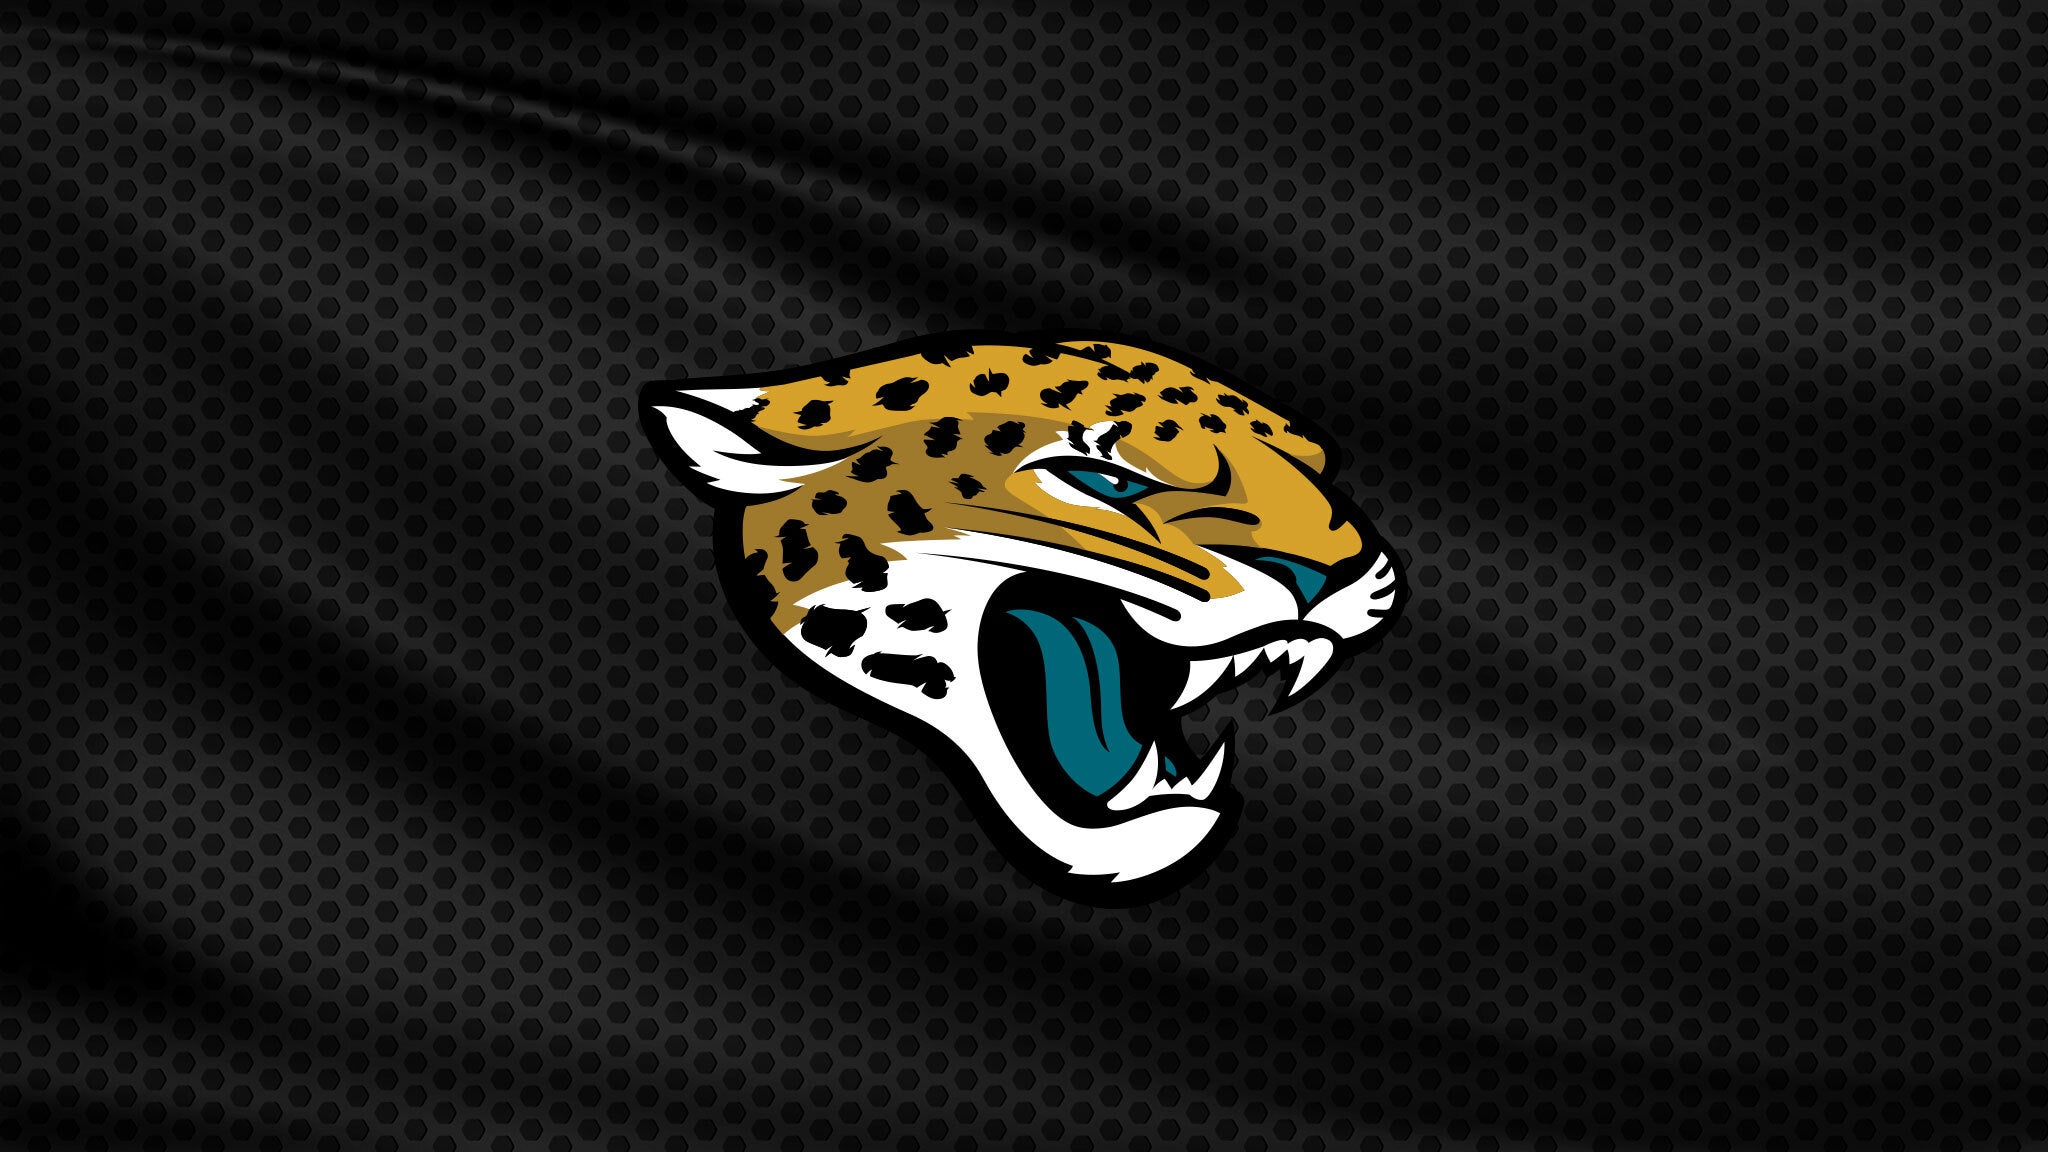 Jacksonville Jaguars vs. Indianapolis Colts in Jacksonville promo photo for STicketmaster Access presale offer code